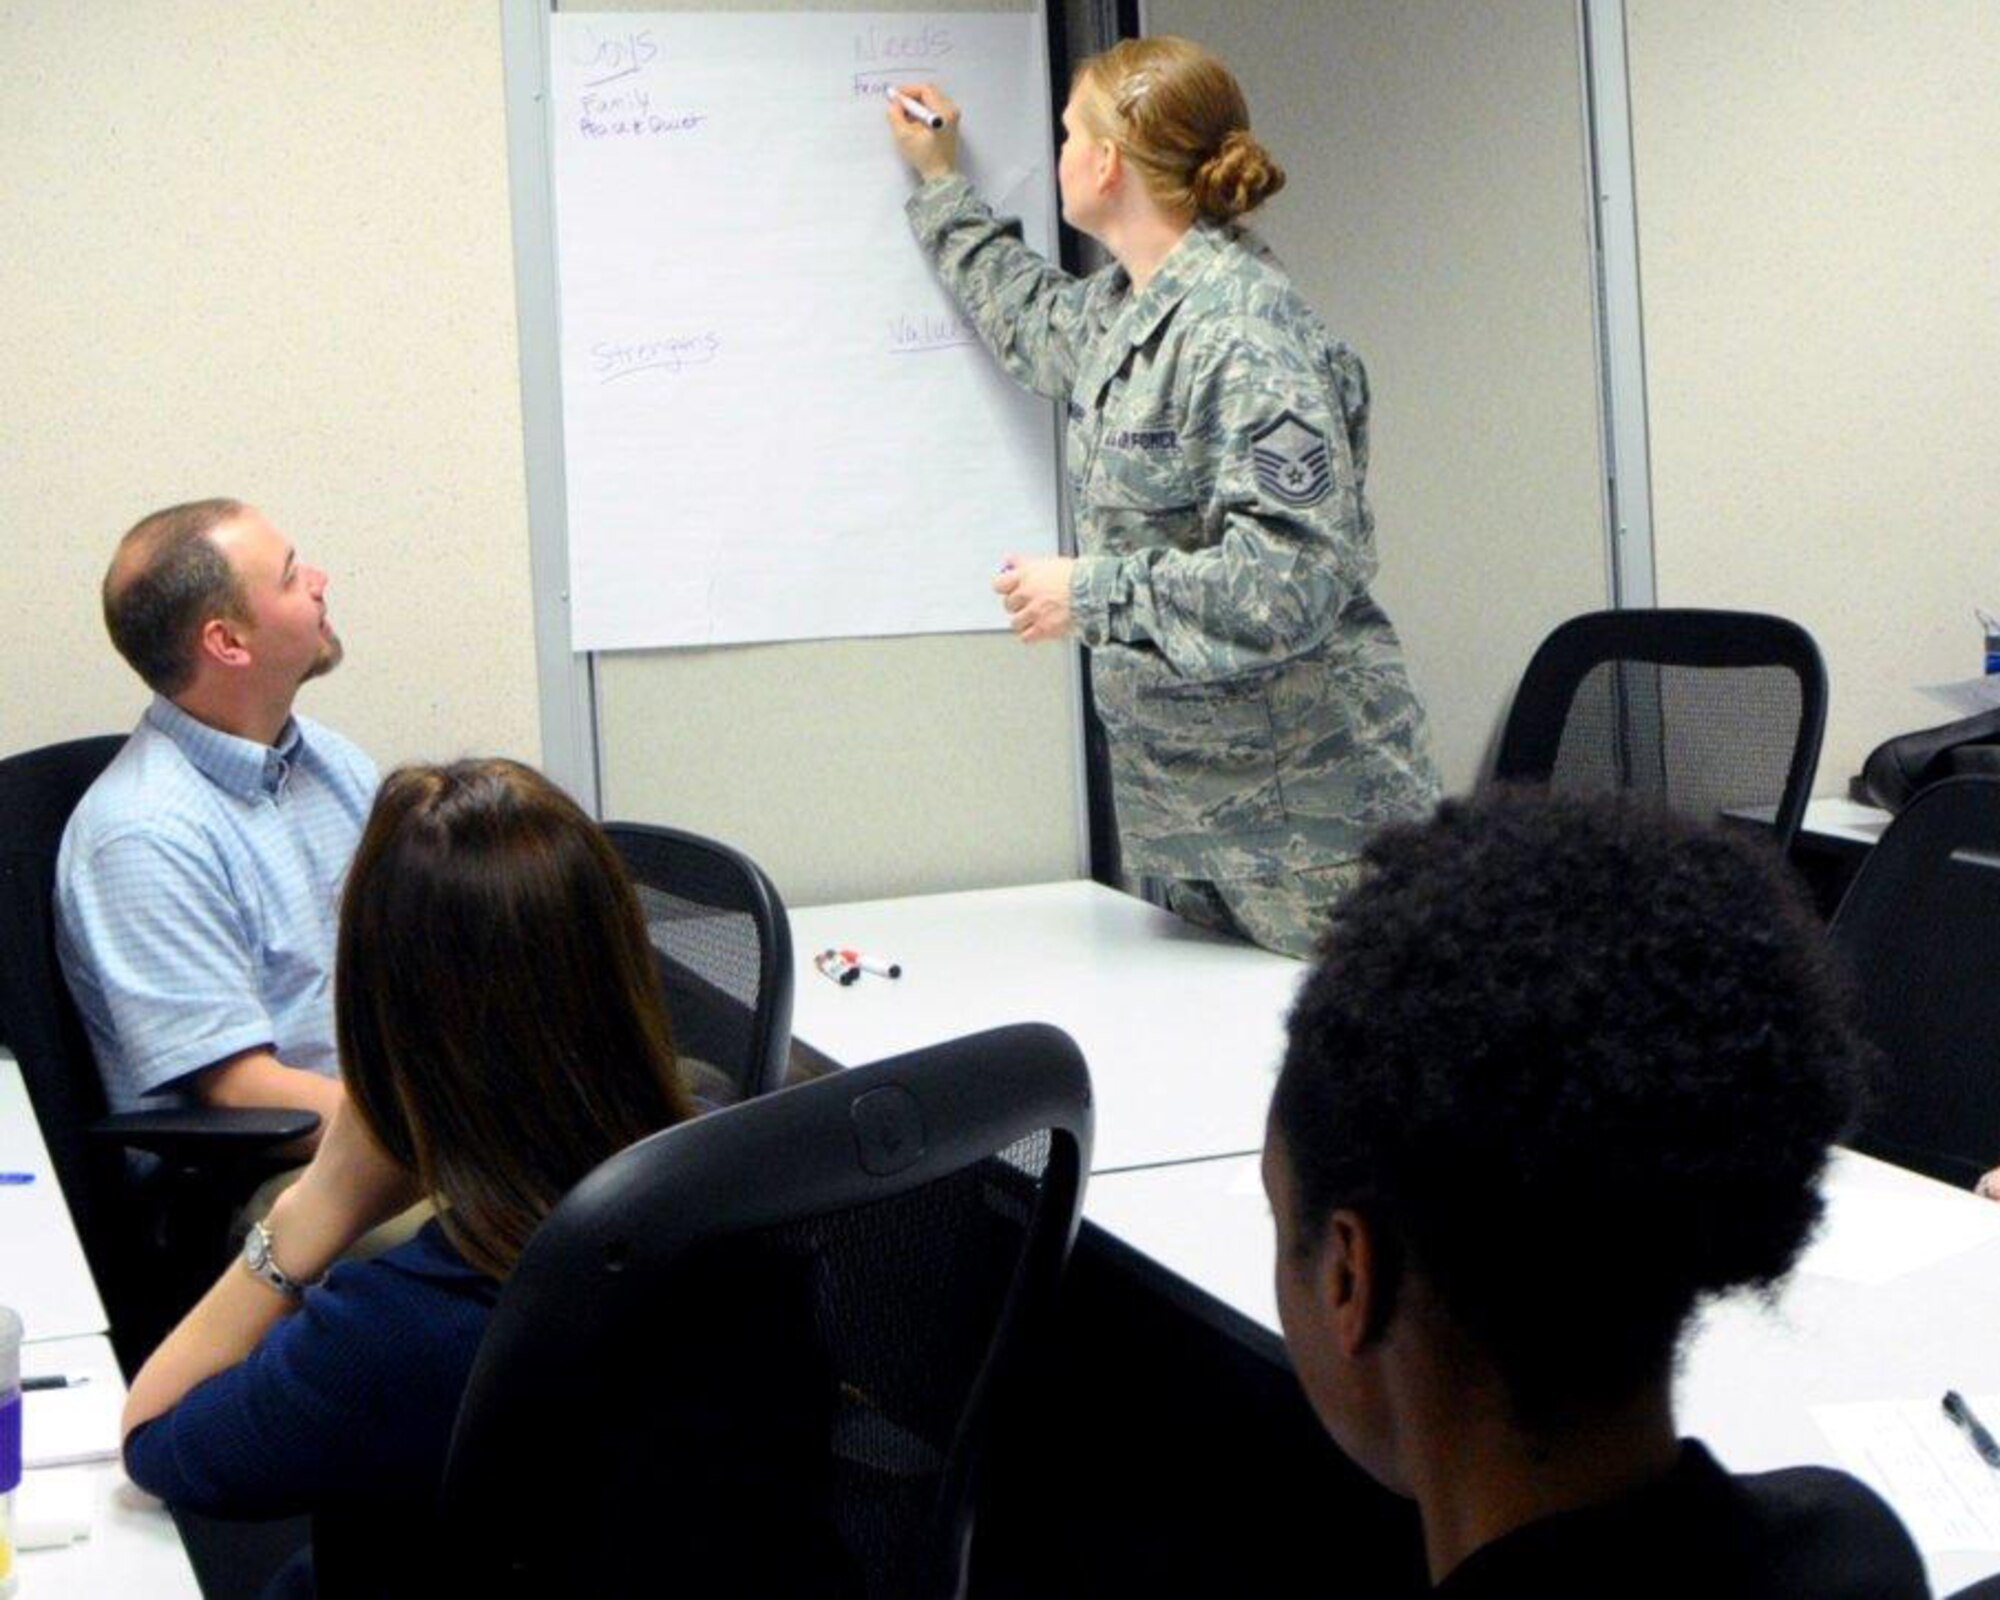 The October Focus Week at Wright-Patterson Air Force Base will be focused on career development and knowledge enhancement. (Skywrighter file photo)